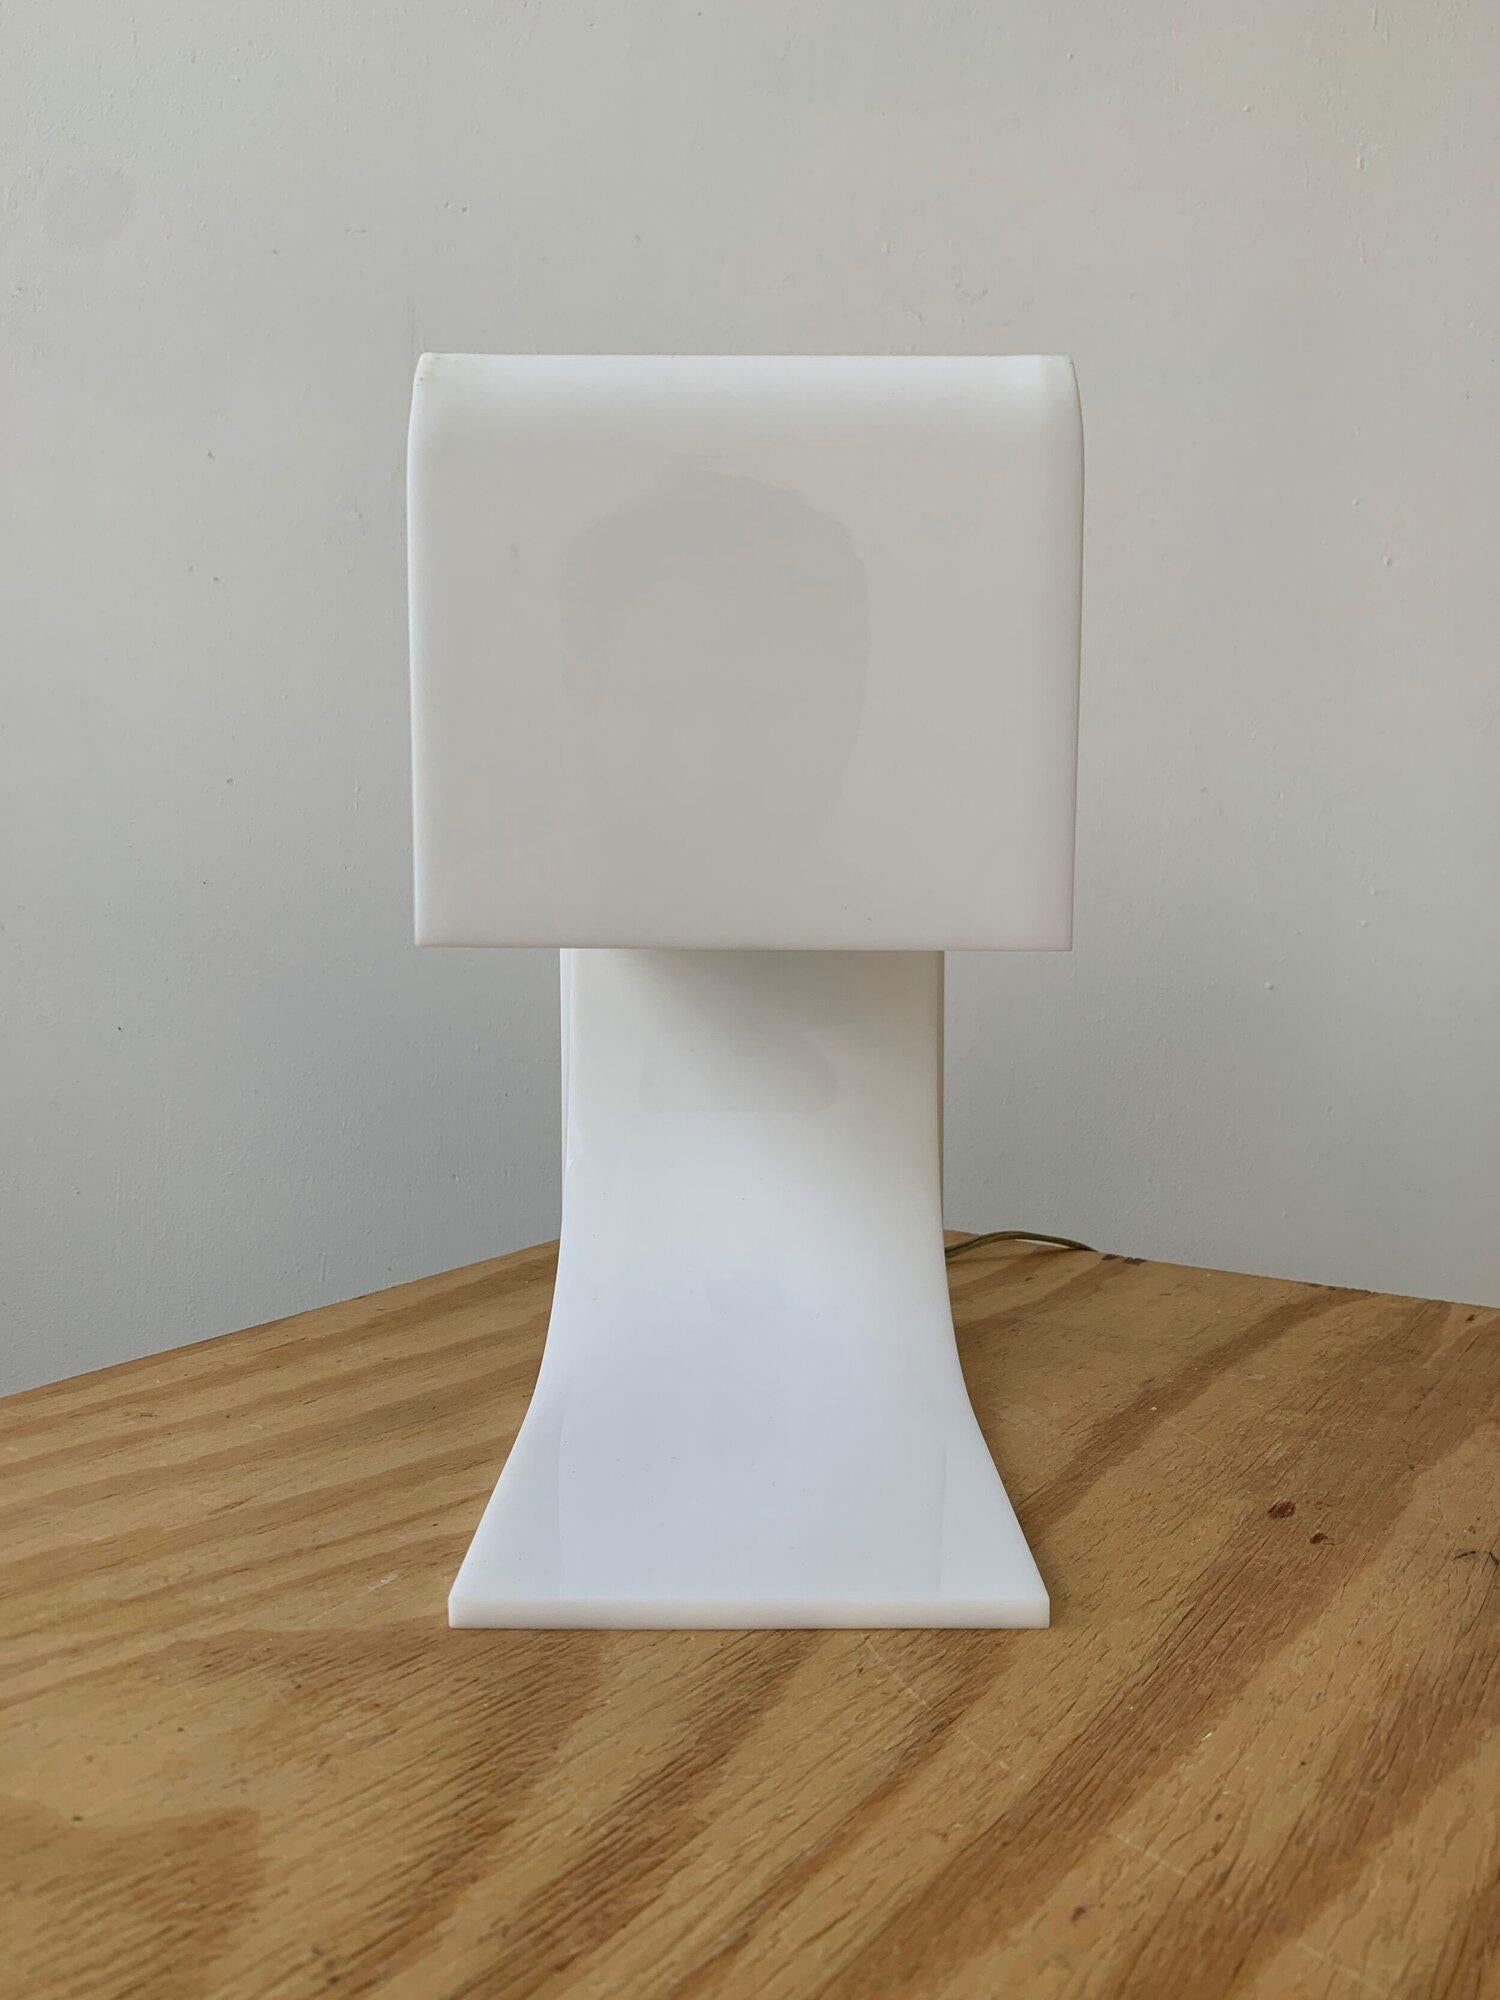 20th Century Vintage Molded White Plexiglass Lamp Designed by Neal Small, Circa 1965 For Sale